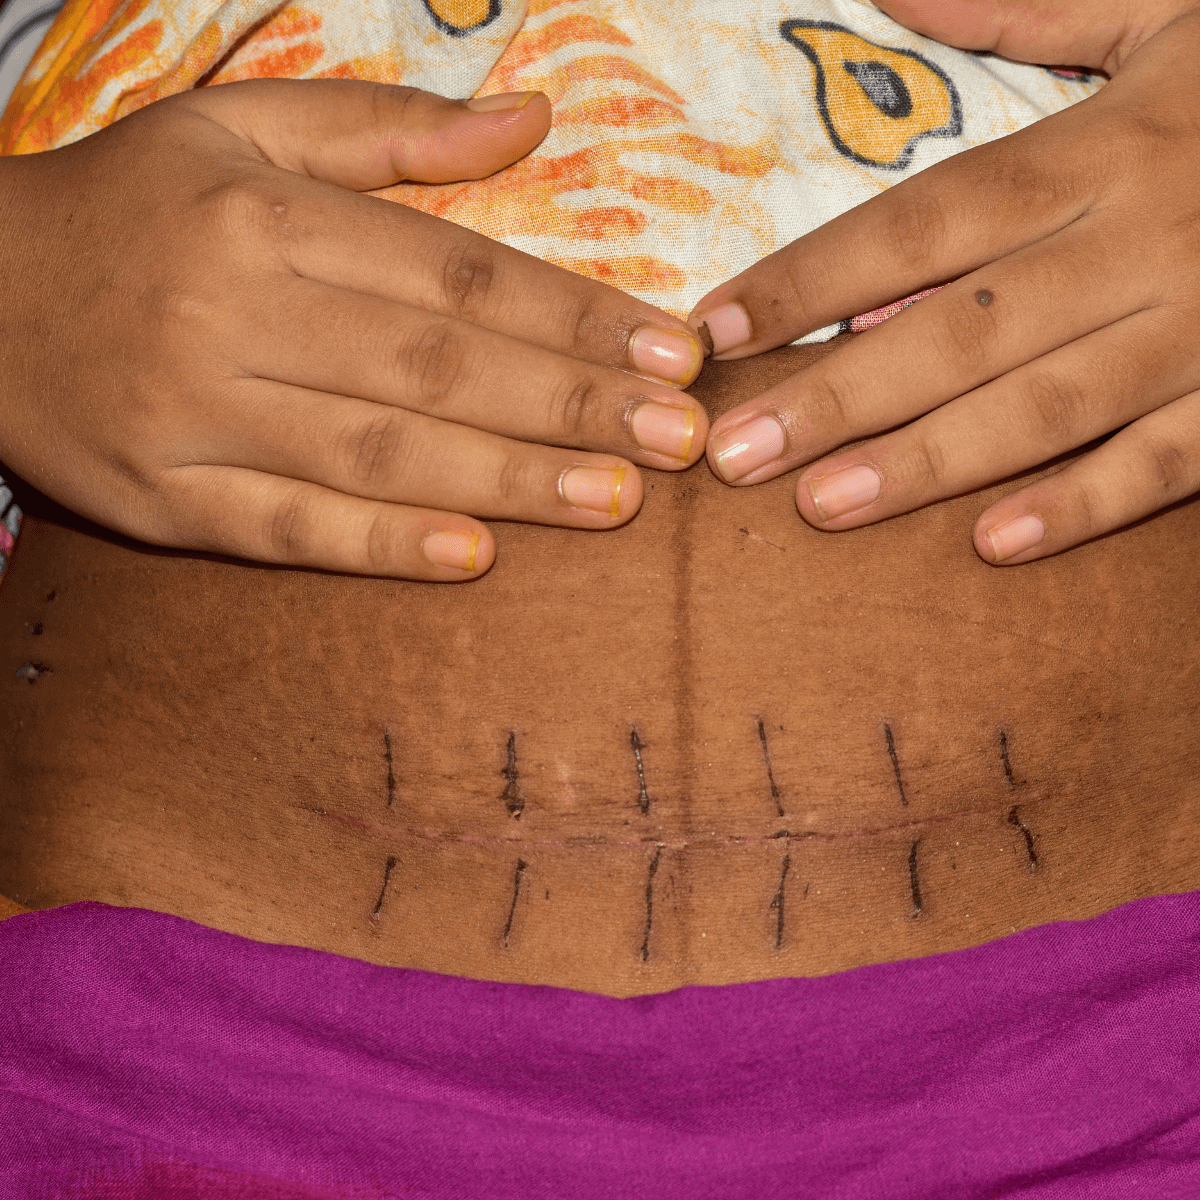 This image shows a person of color's midsection with a linea negra down the center of her belly and a csection scar with black lines around it.